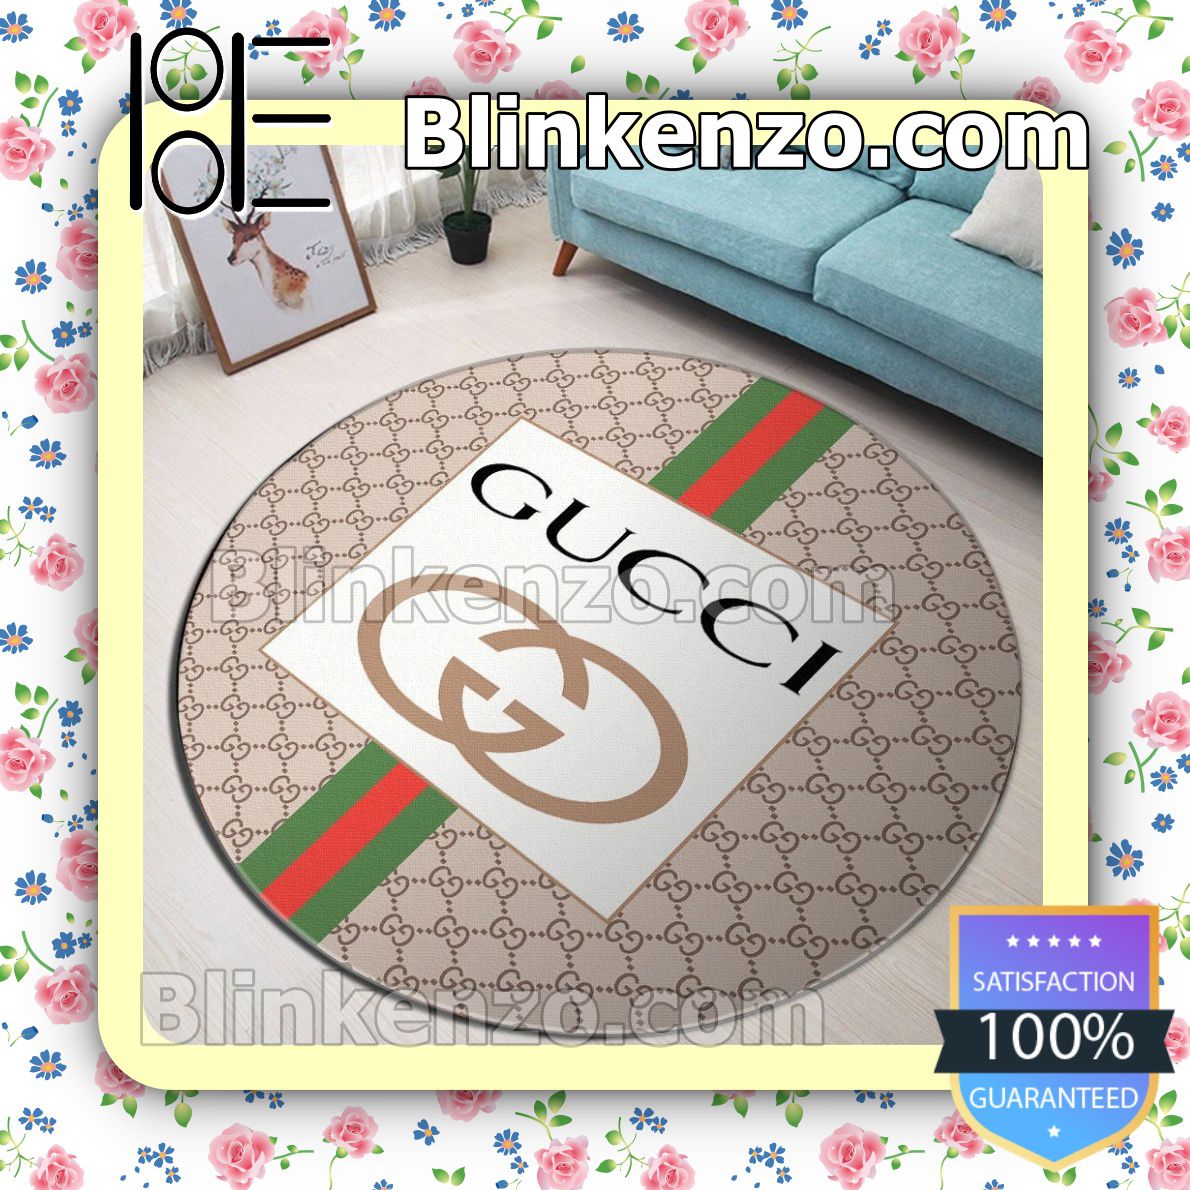 Buy In US Gucci Beige Monogram With Logo In White Square And Color Stripes Round Carpet Runners